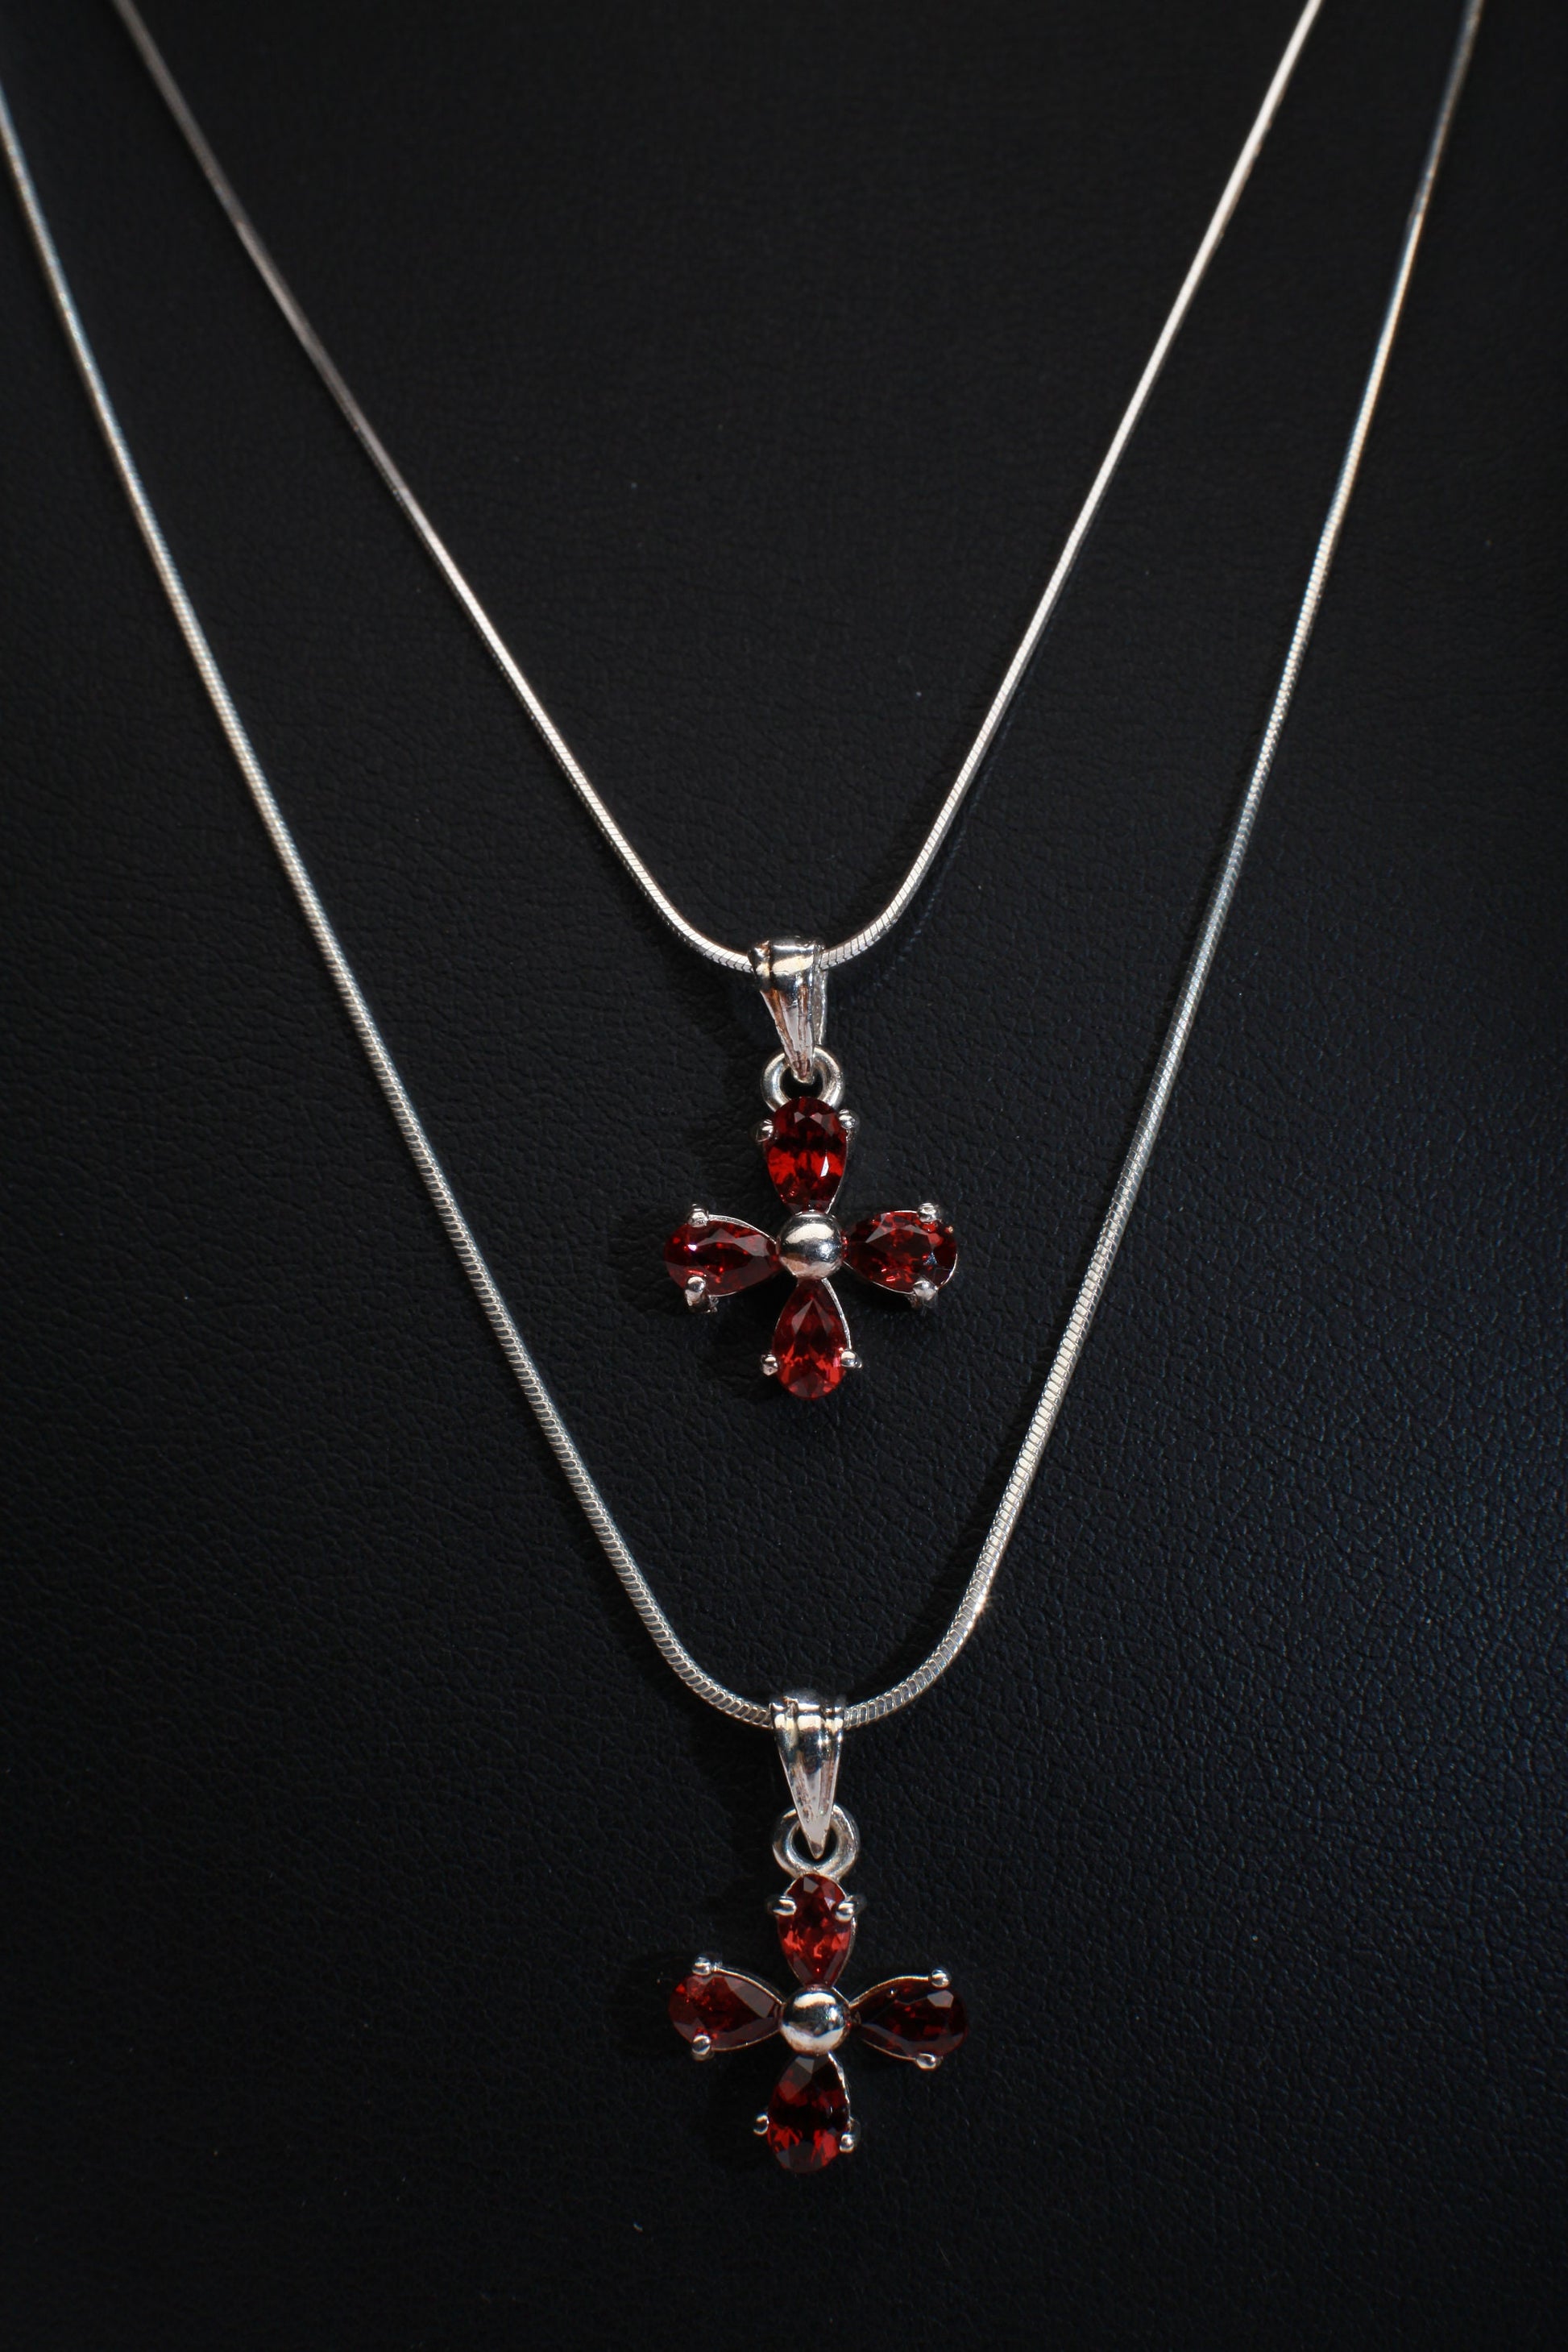 Genuine Garnet Sterling Silver Flower Cluster Charm with .925 Italian Sterling Silver Snake Chain, Choice of 16" or 18"